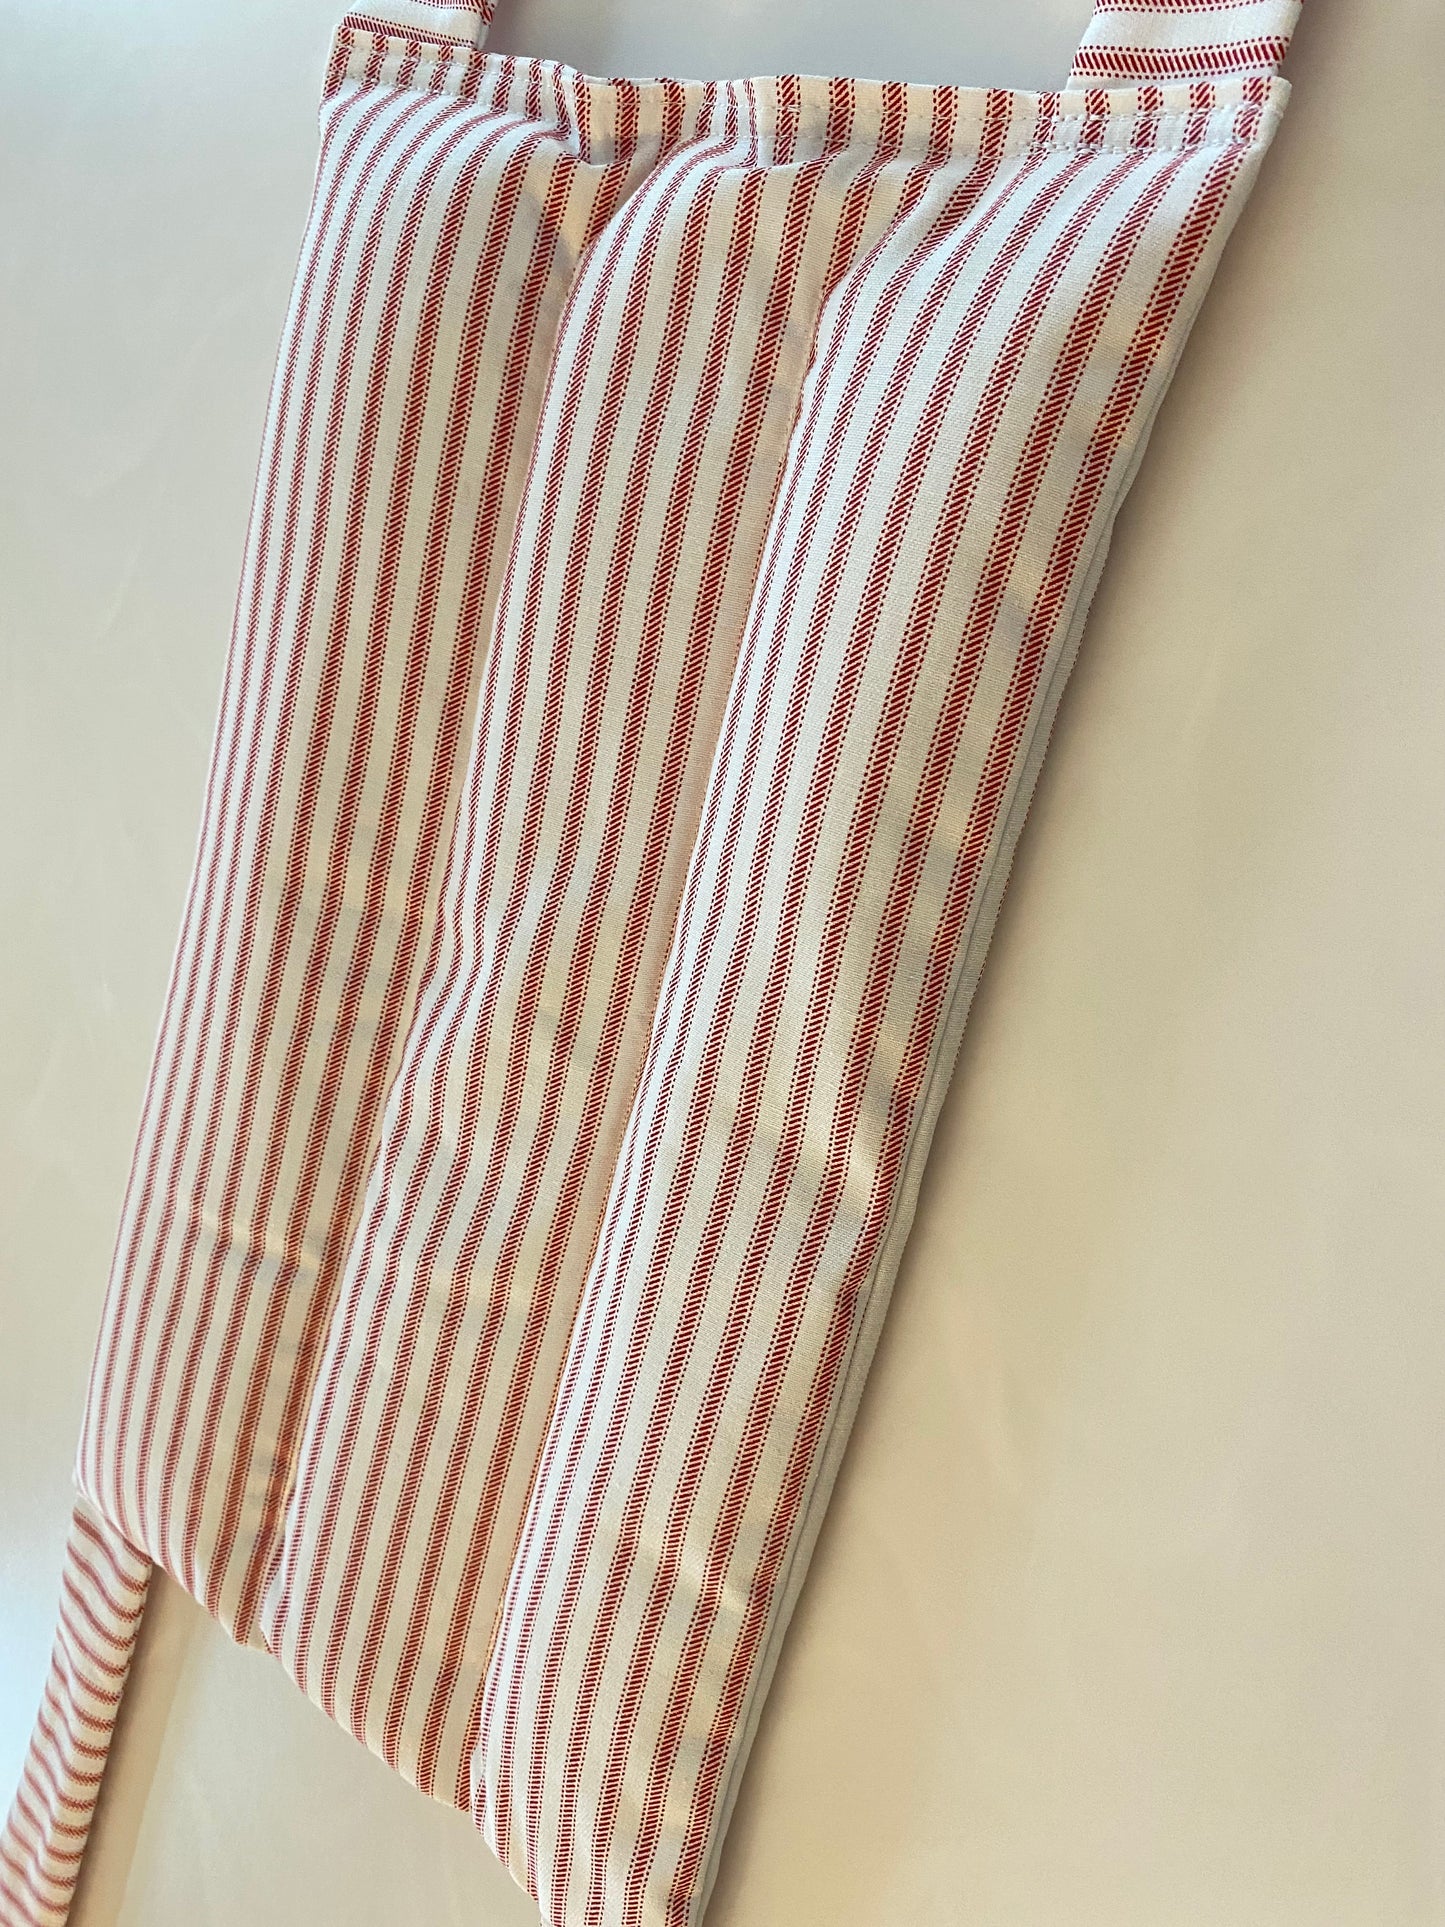 Red Stripe Large Microwavable Rice Bag with Ties for Hands Free Use